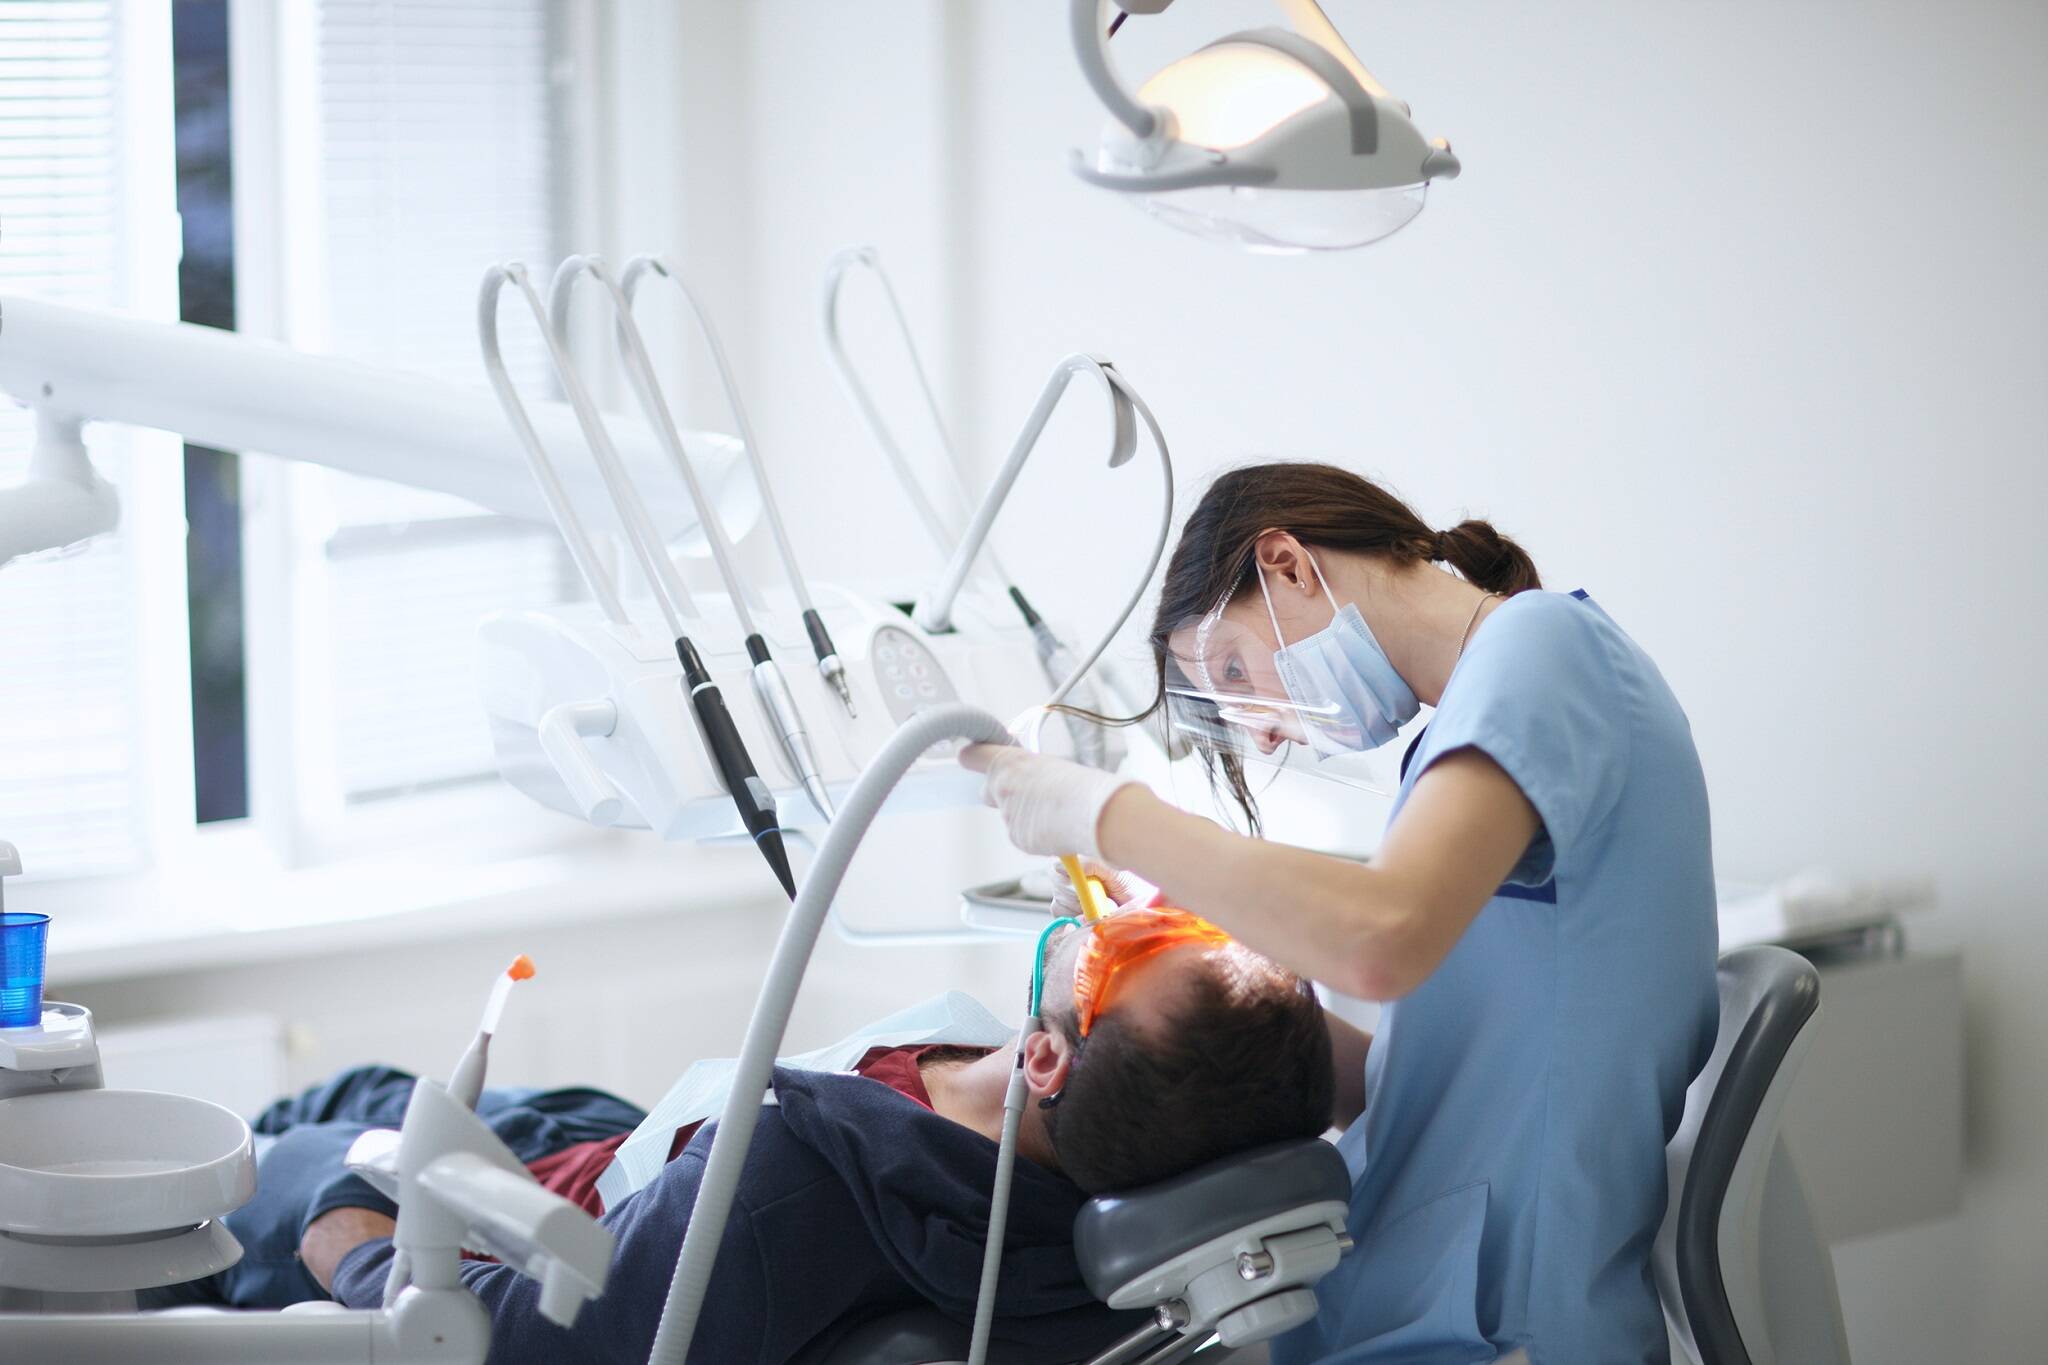 Here's what to know and how to apply for the new Canadian Dental Care Plan